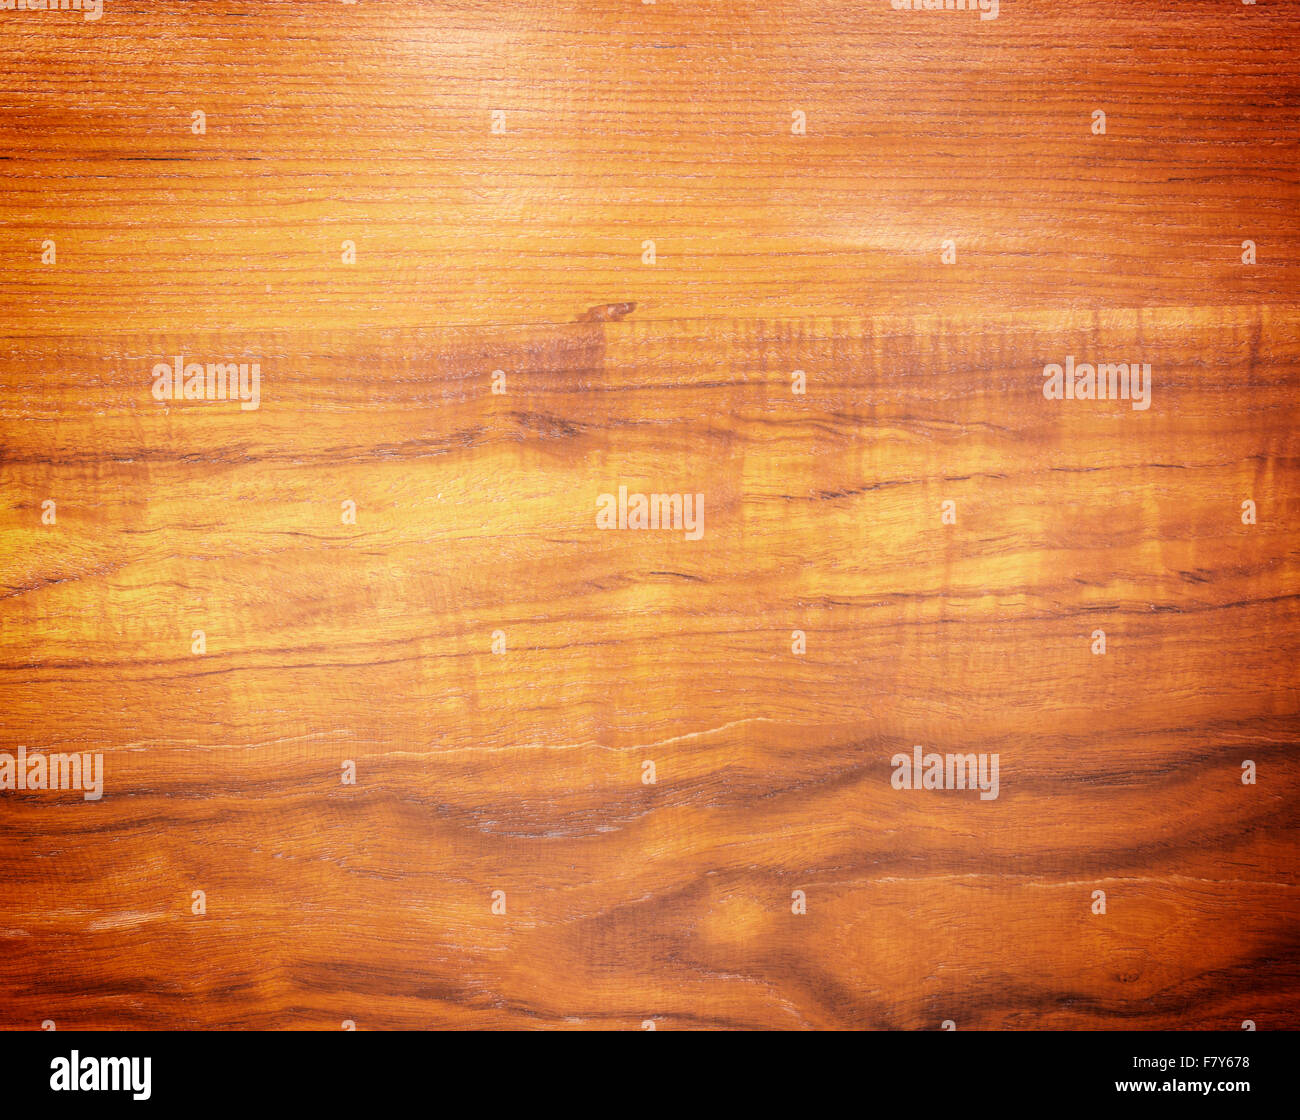 Wood plank brown smooth teak wood texture background Stock Photo - Alamy